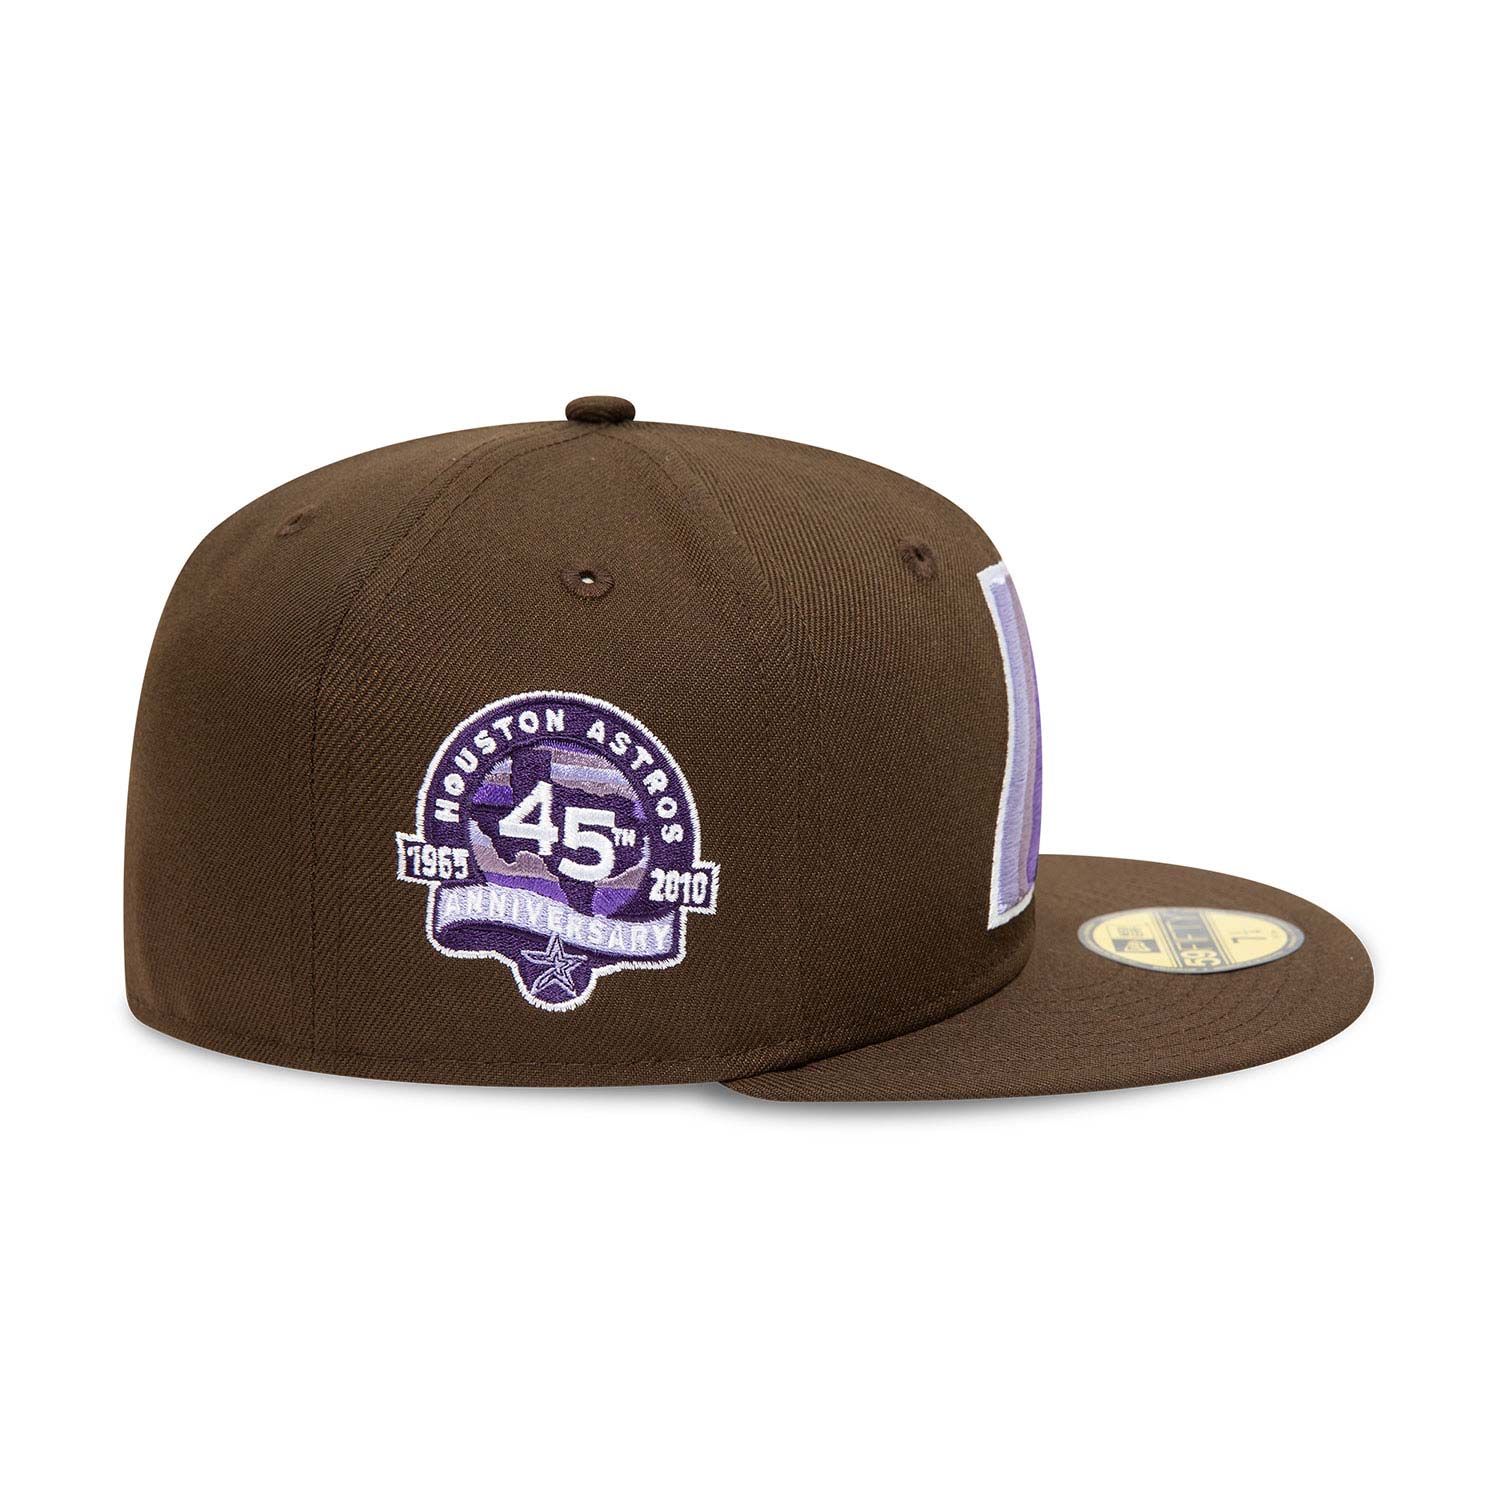 Houston Astros A Star Brown 59FIFTY Fitted Cap